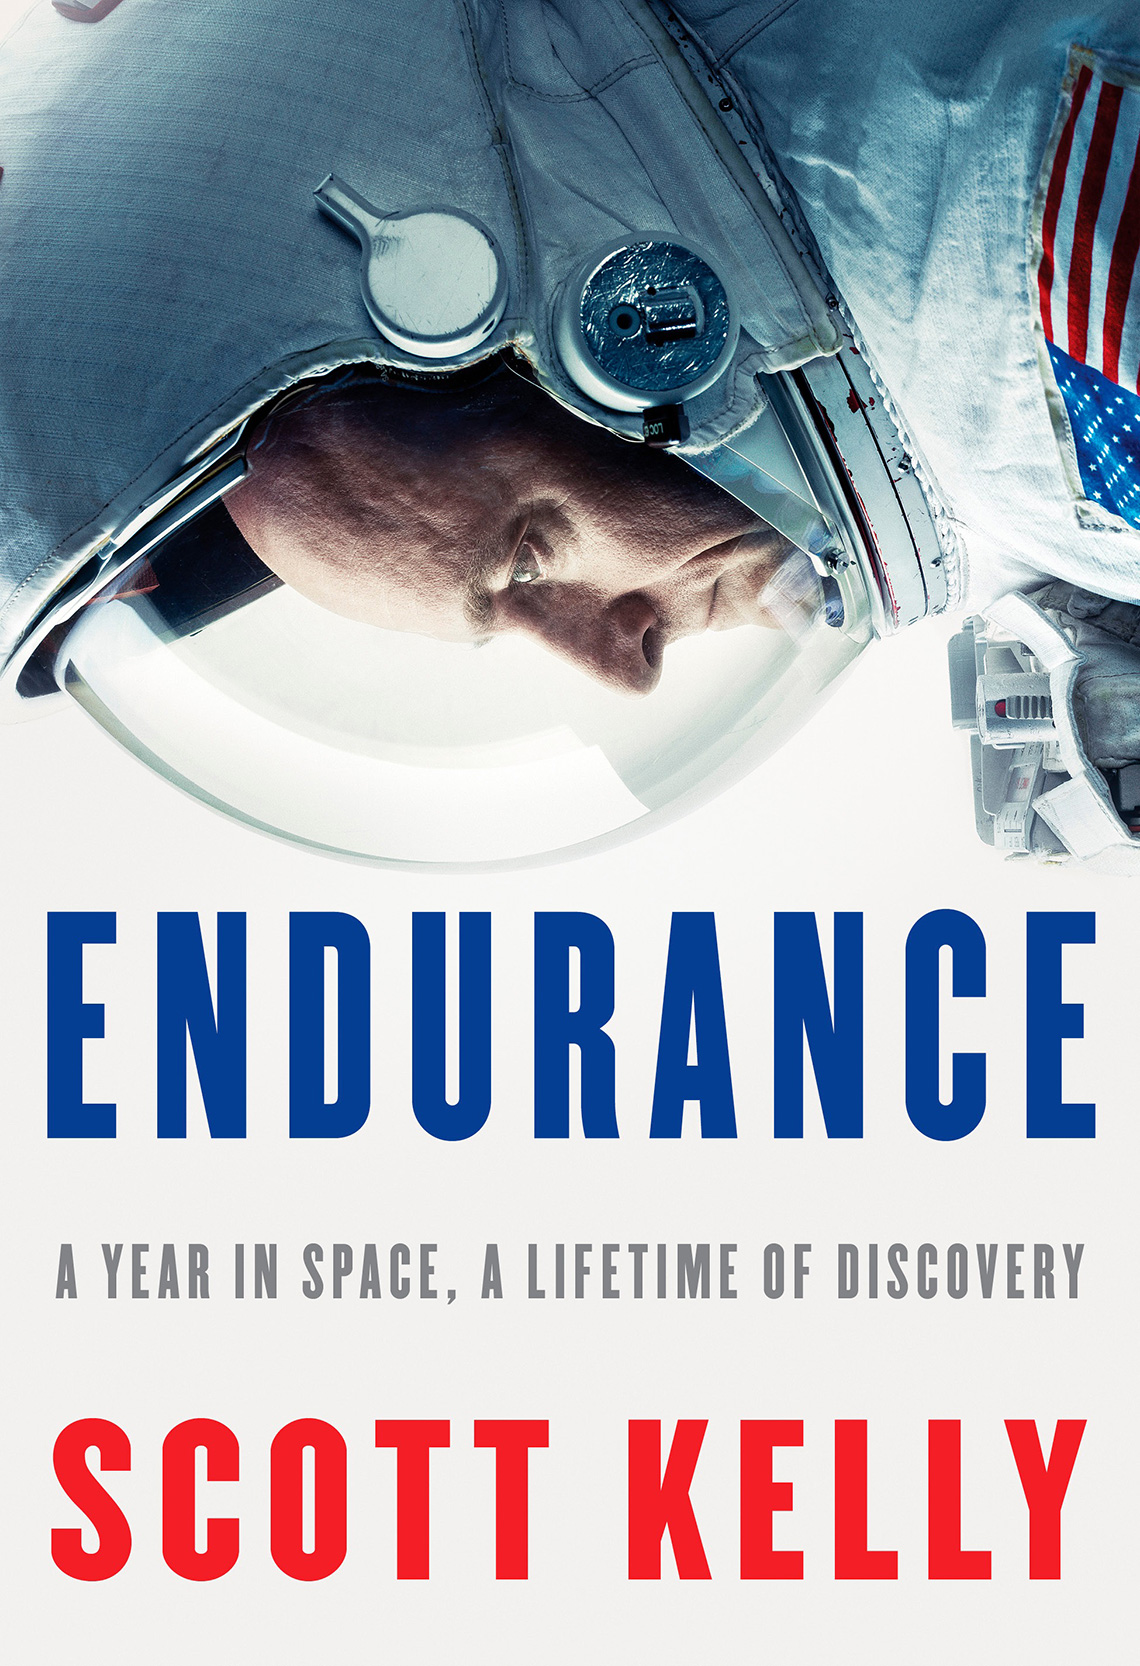 'Endurance: A Year in Space, A Lifetime of Discovery' by Scott Kelly